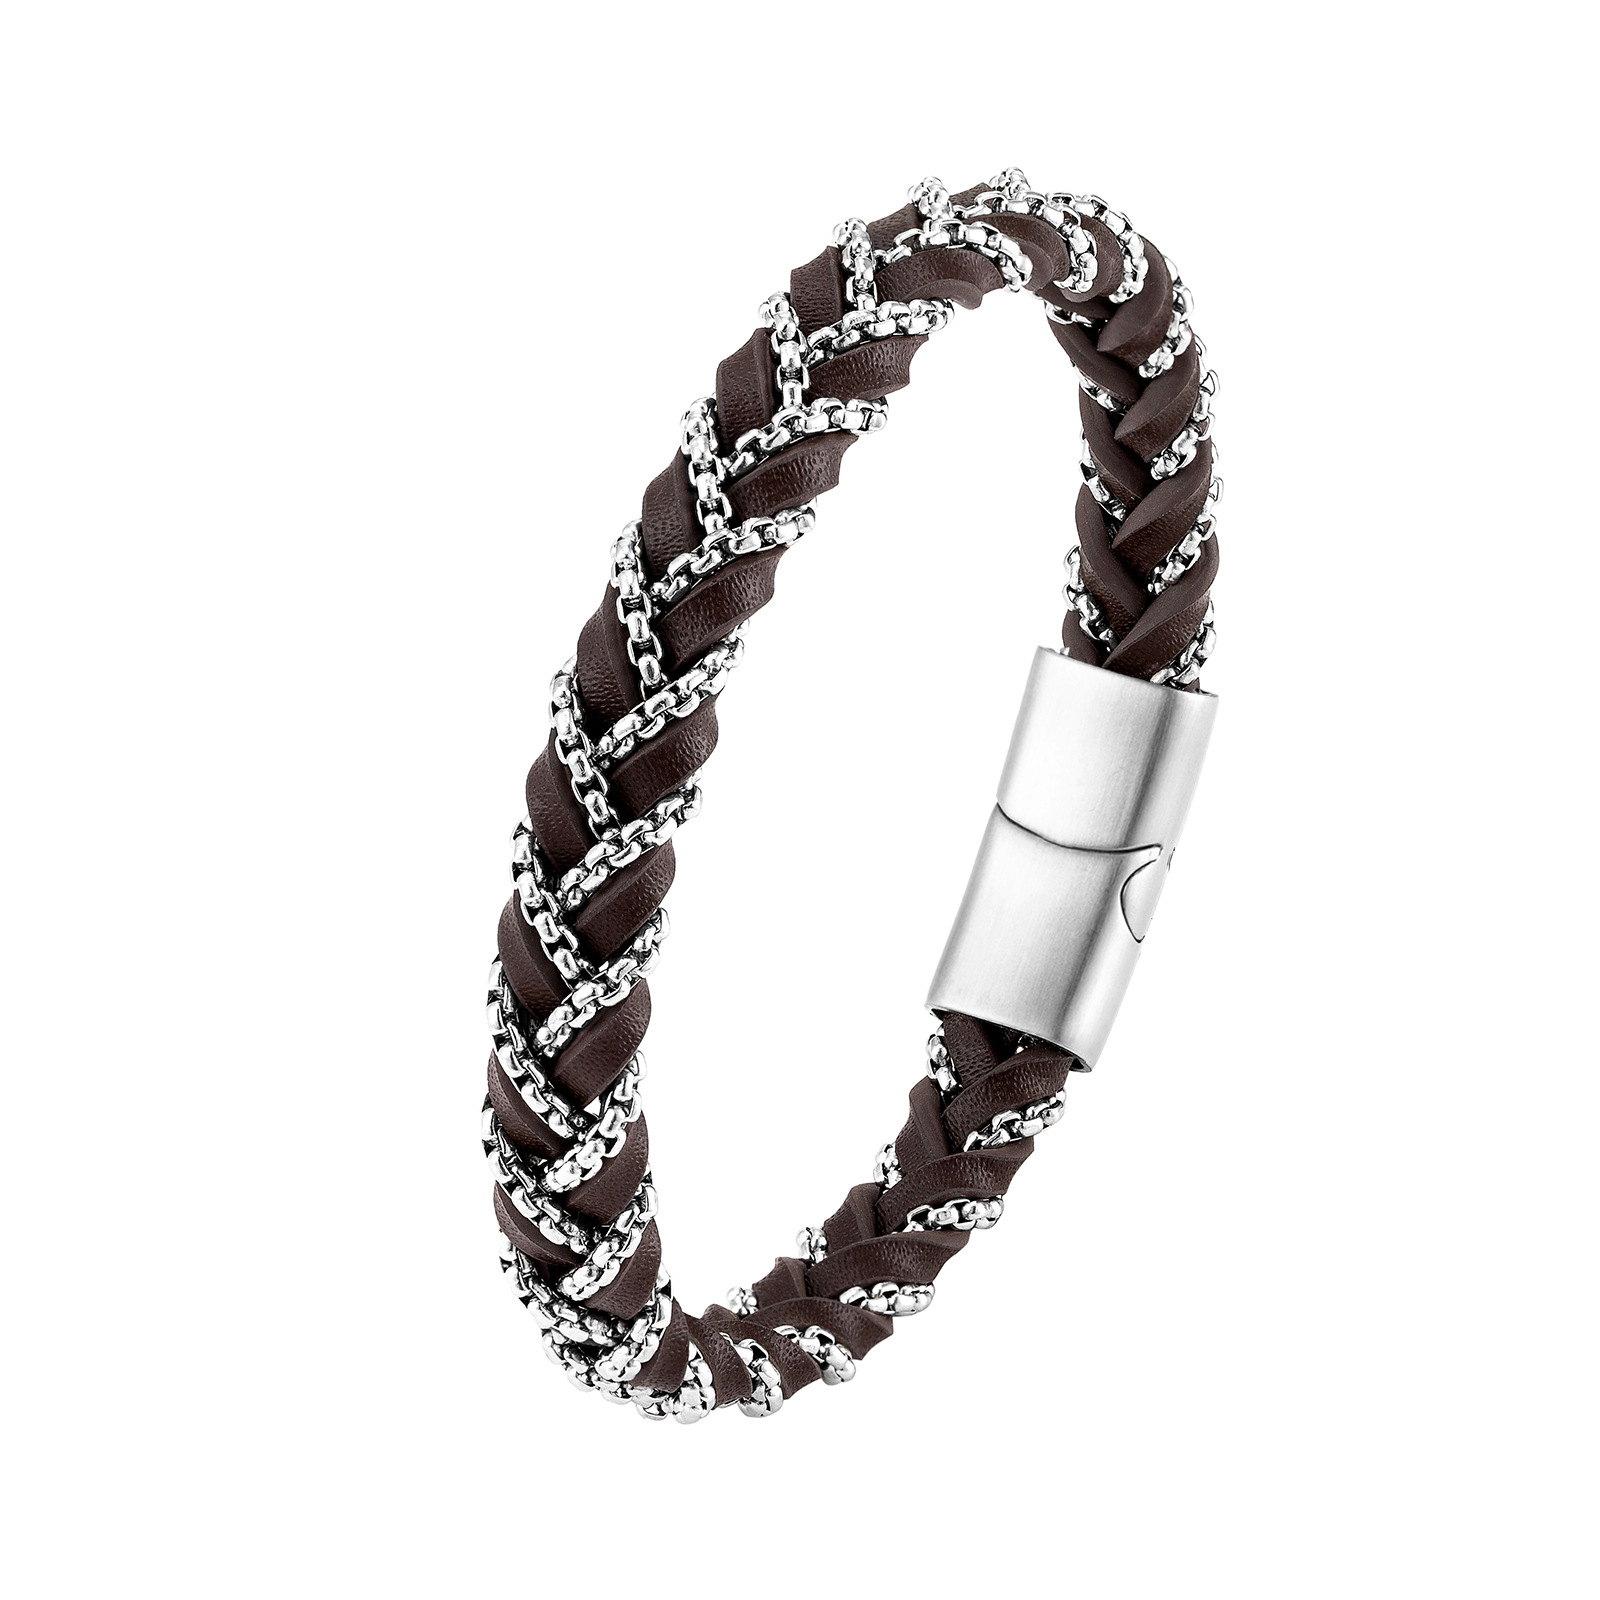 3:Brown leather steel chain